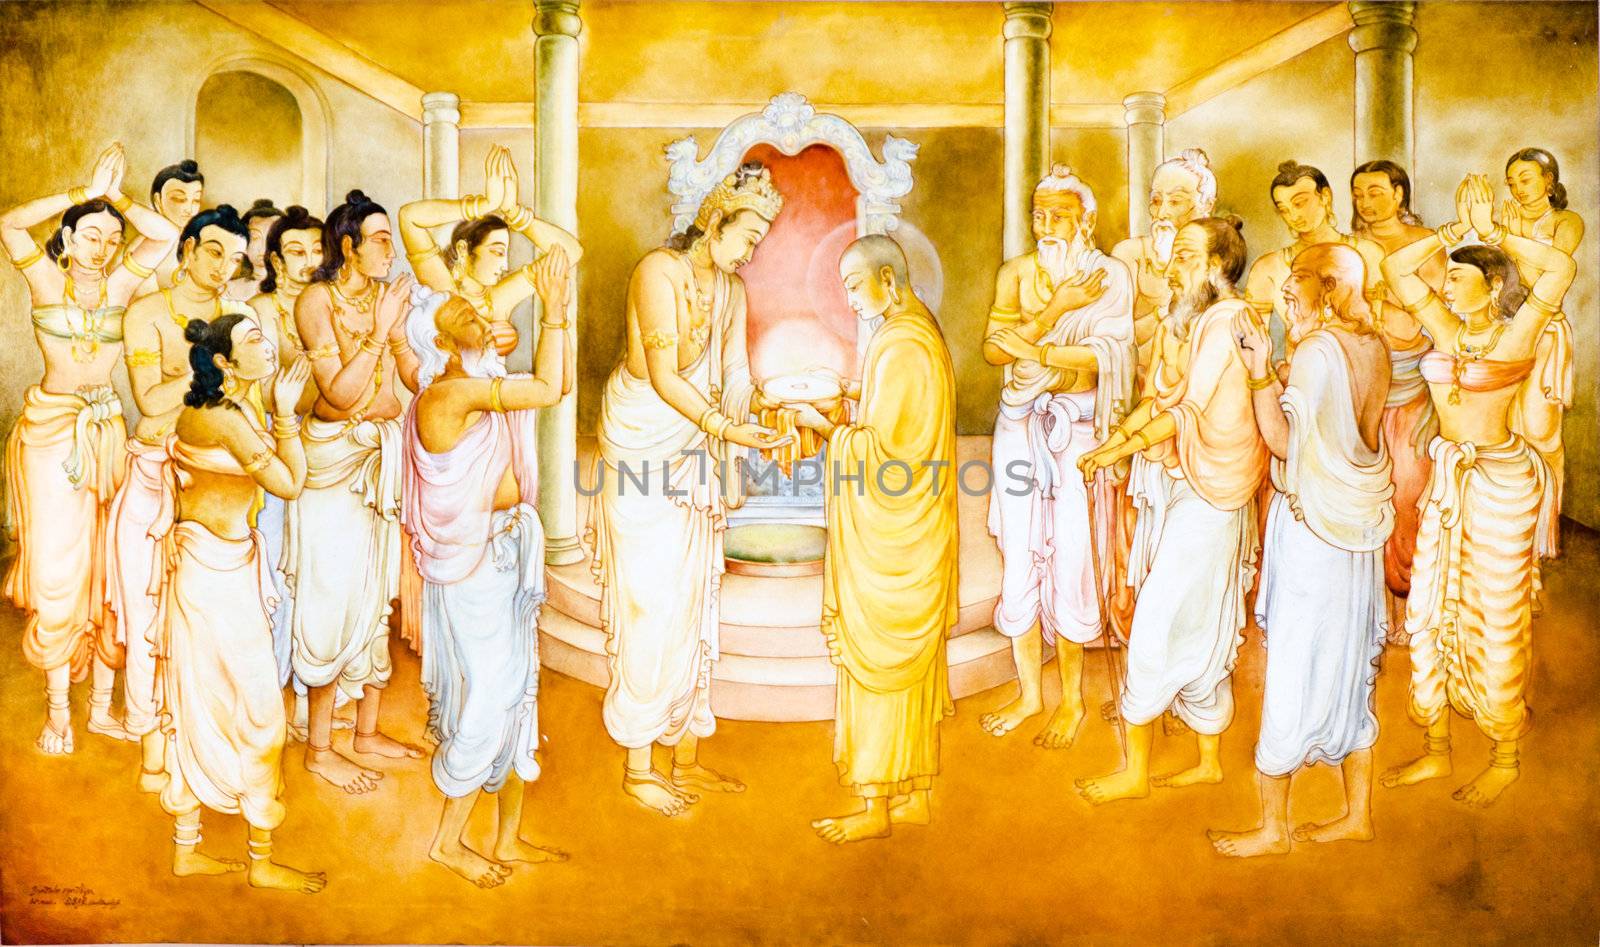 TEMPLE OF SACRED TOOTH RELIC IN KANDY, SRI LANKA, DECEMBER 8.  painting" The Arahath Kema presented King Brahmadatta of Kalinga with the Sacred Tooth Relic for veneration ". KANDY, SRI LANKA, DECEMBER 8, 2011